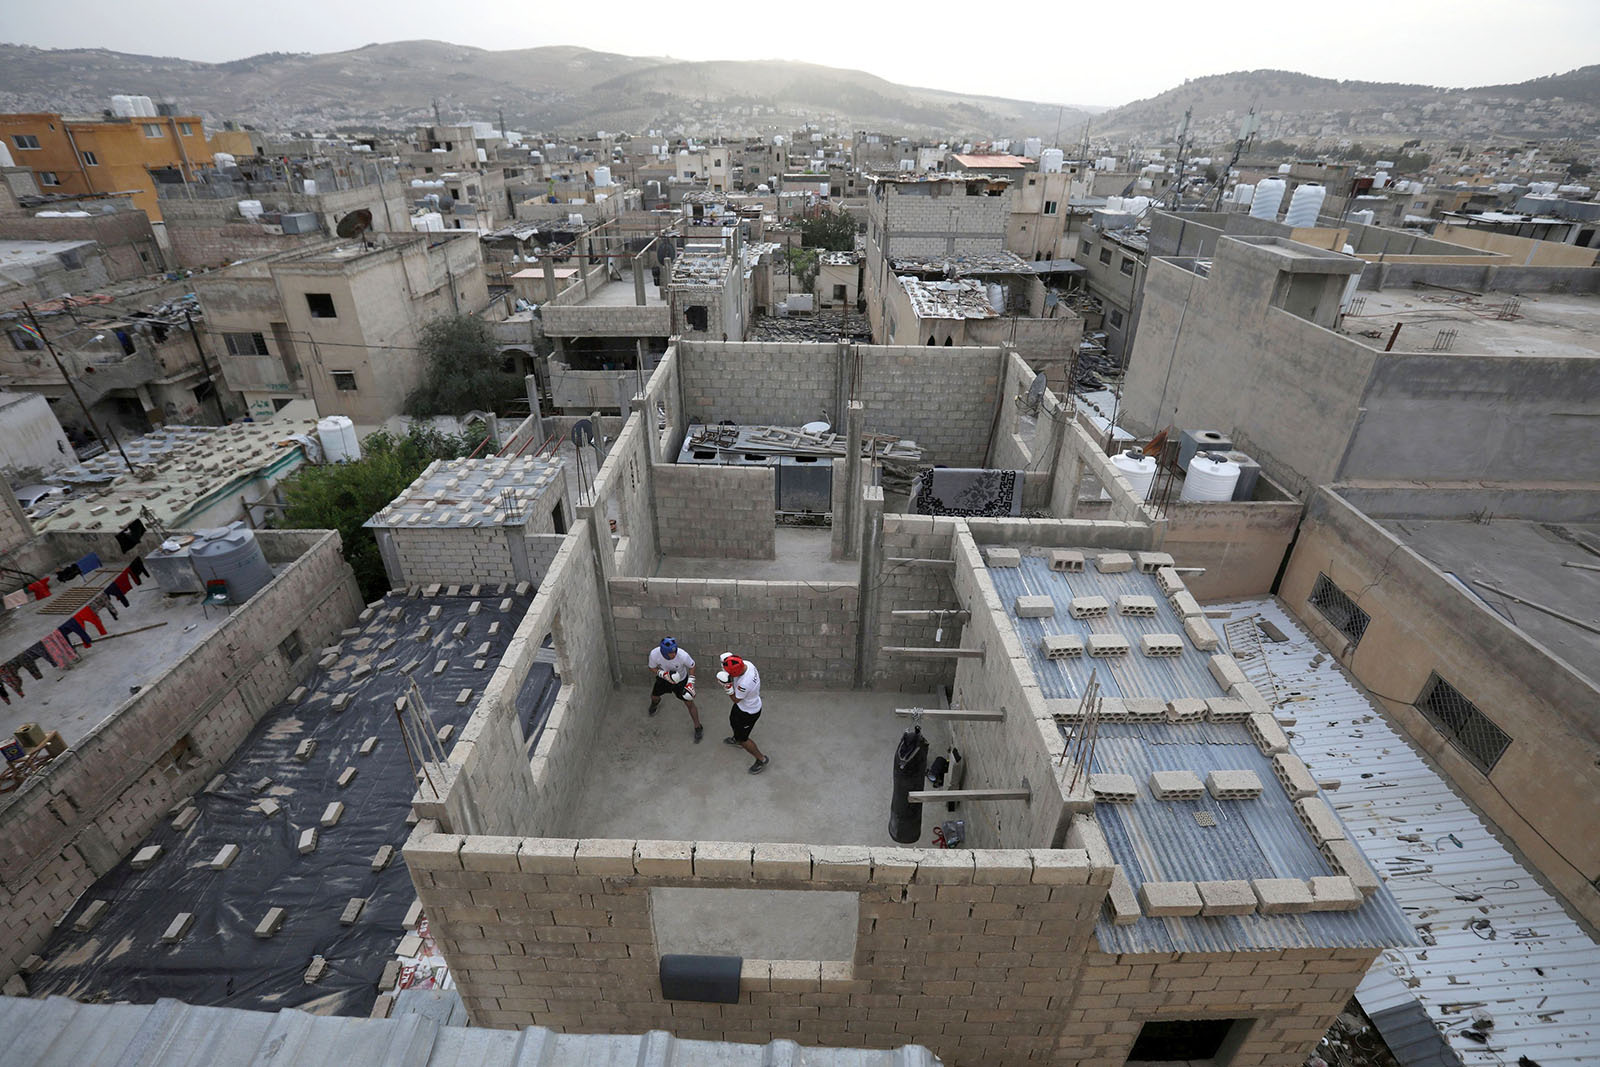 Jordanian boxing brothers Hussein and Zeyad Ashish, who qualified for next year's Olympics, train on the roof of their family home during curfew on May 14 near Amman, Jordan.